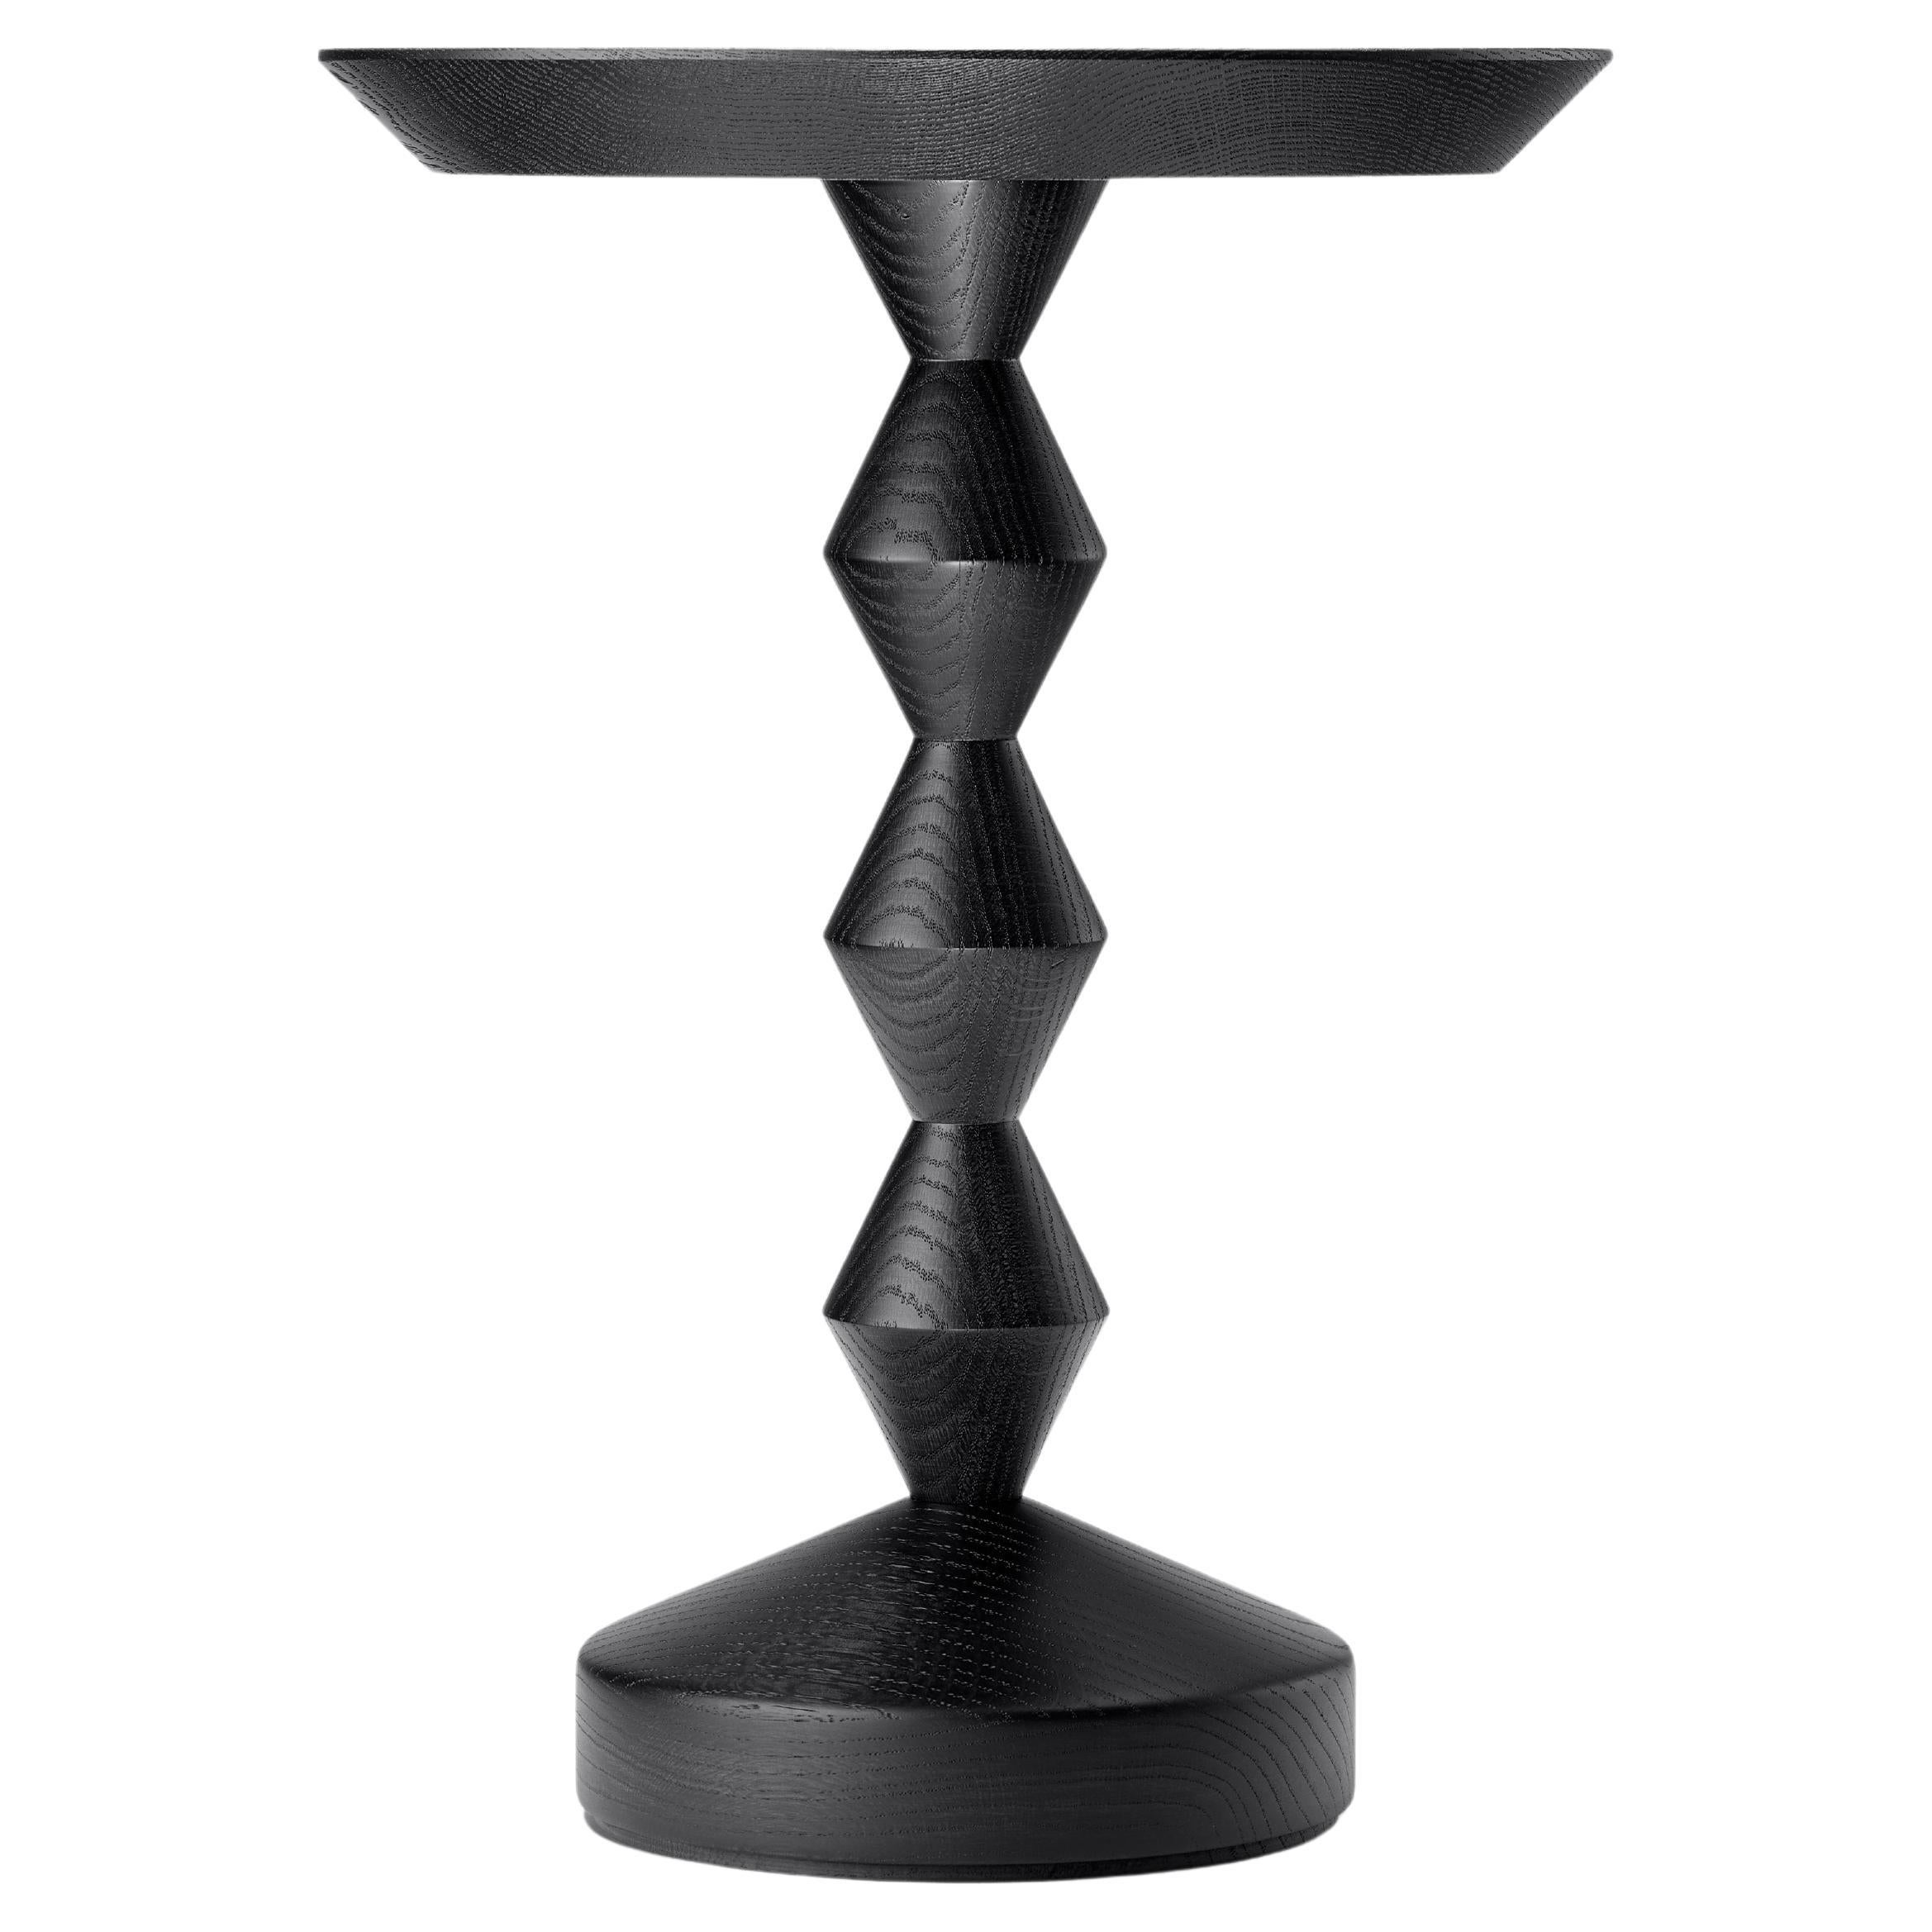 Contemporary Zic-Zac Occasional Table in Oak or Walnut expertly lathe turned